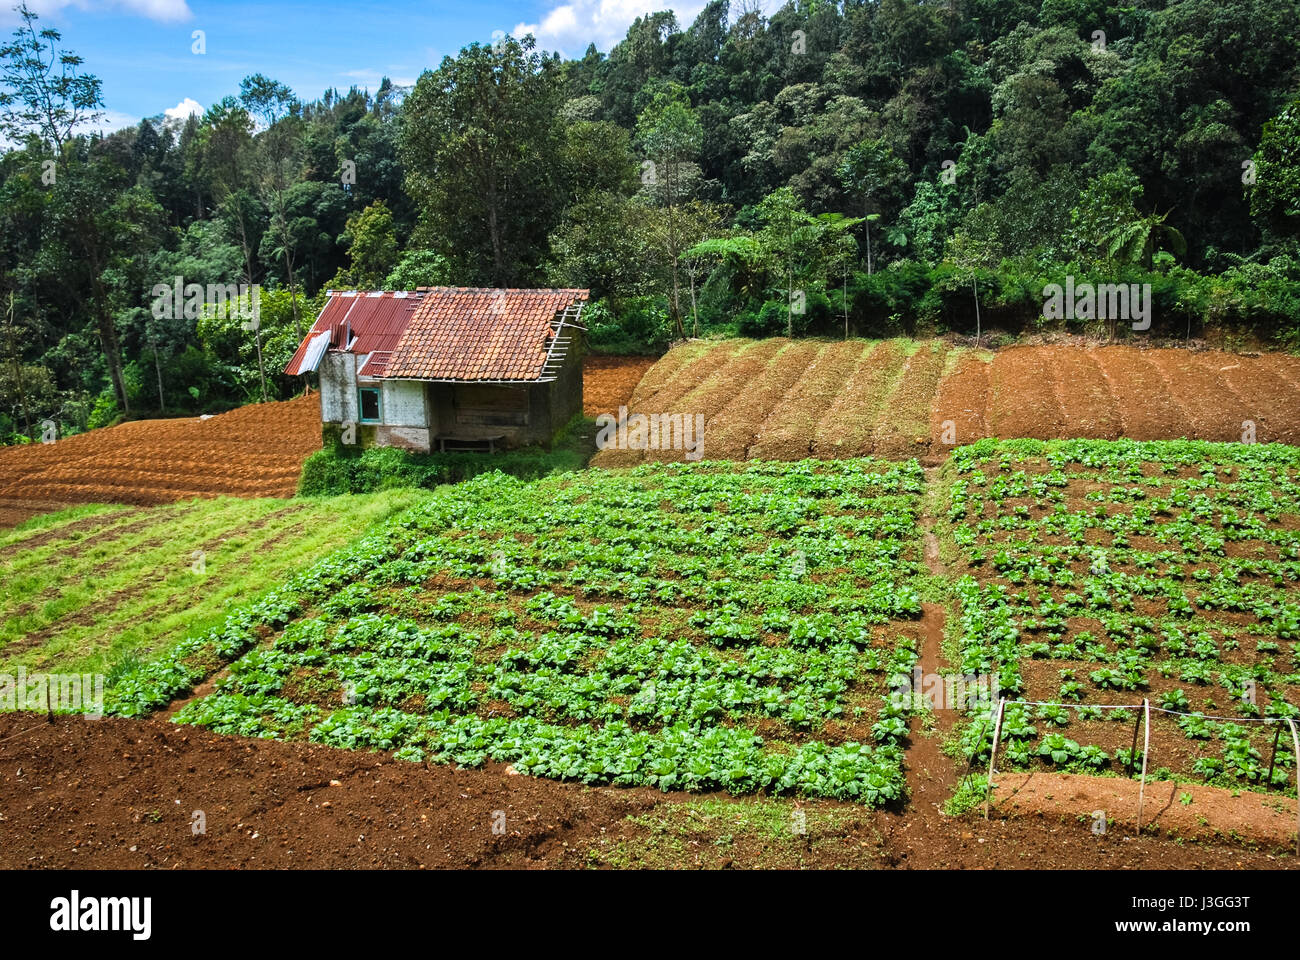 A hut in the middle of vegetable farm just outside Gede Pangrango National Park's boundary in West Java, Indonesia. Stock Photo